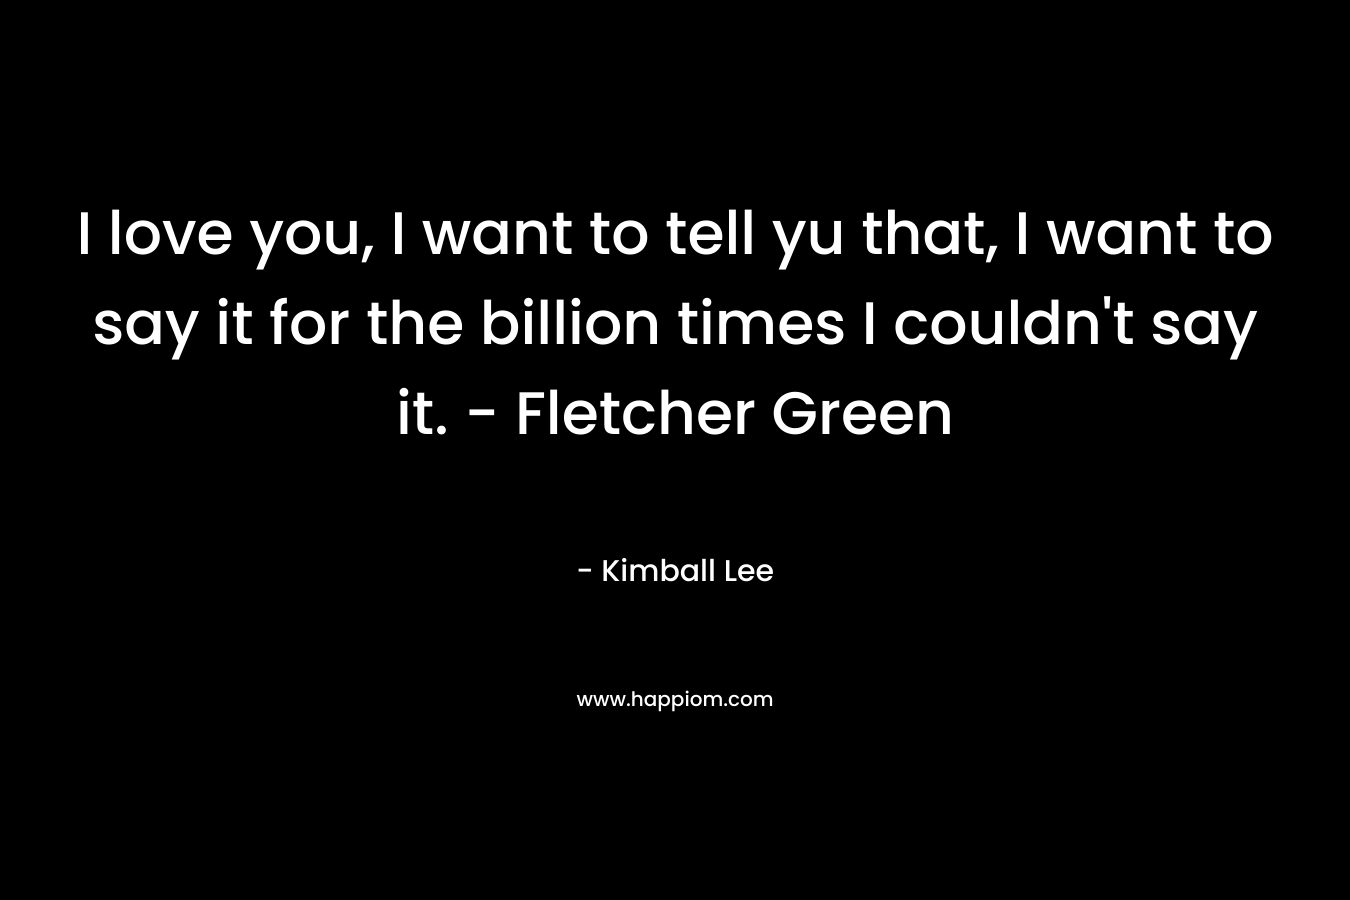 I love you, I want to tell yu that, I want to say it for the billion times I couldn't say it. - Fletcher Green